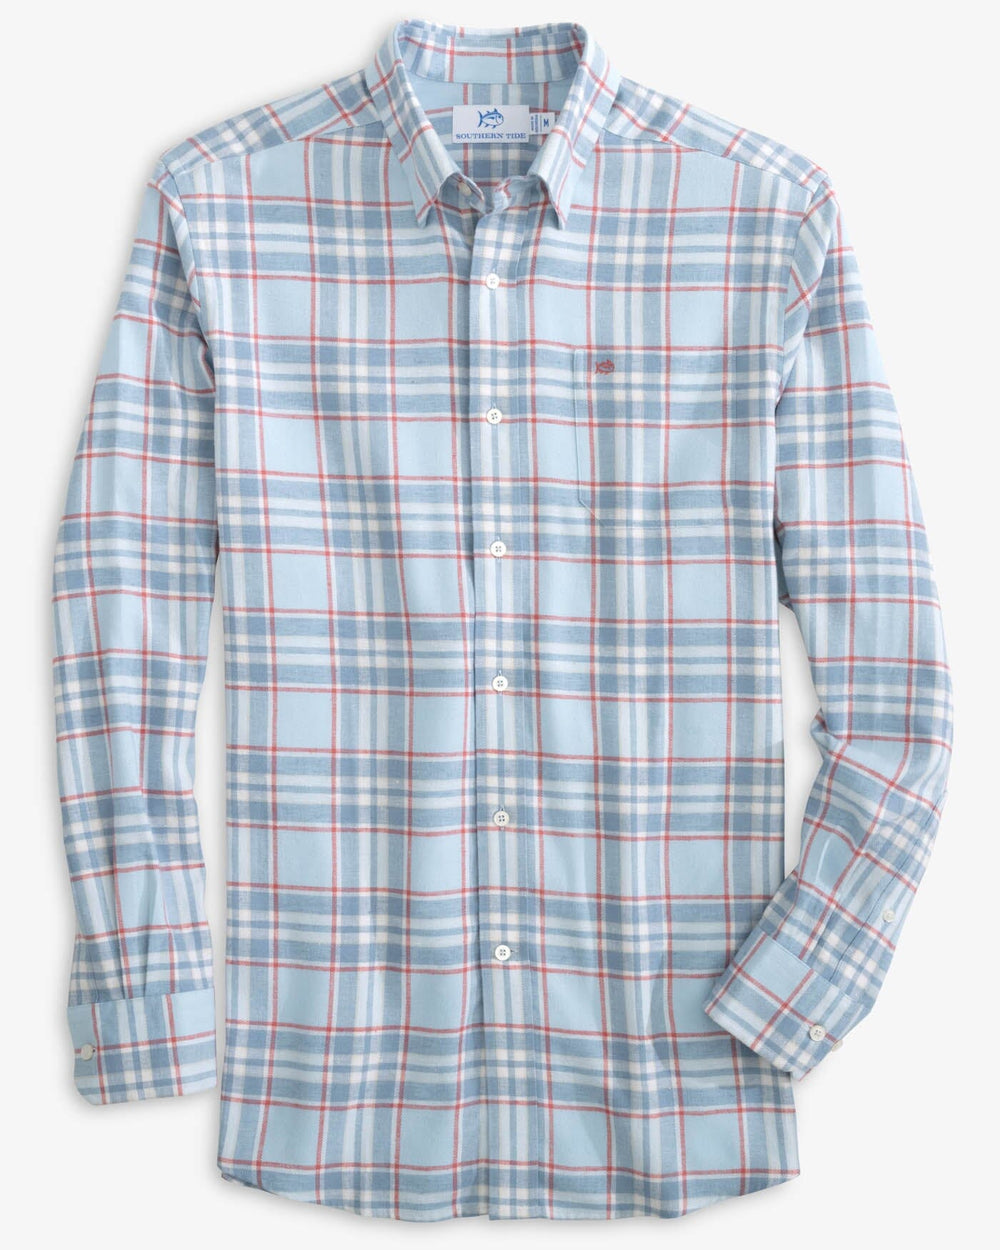 The front view of the Southern Tide Beach Flannel Heather Reddick Plaid Sport Shirt by Southern Tide - Heather Dream Blue